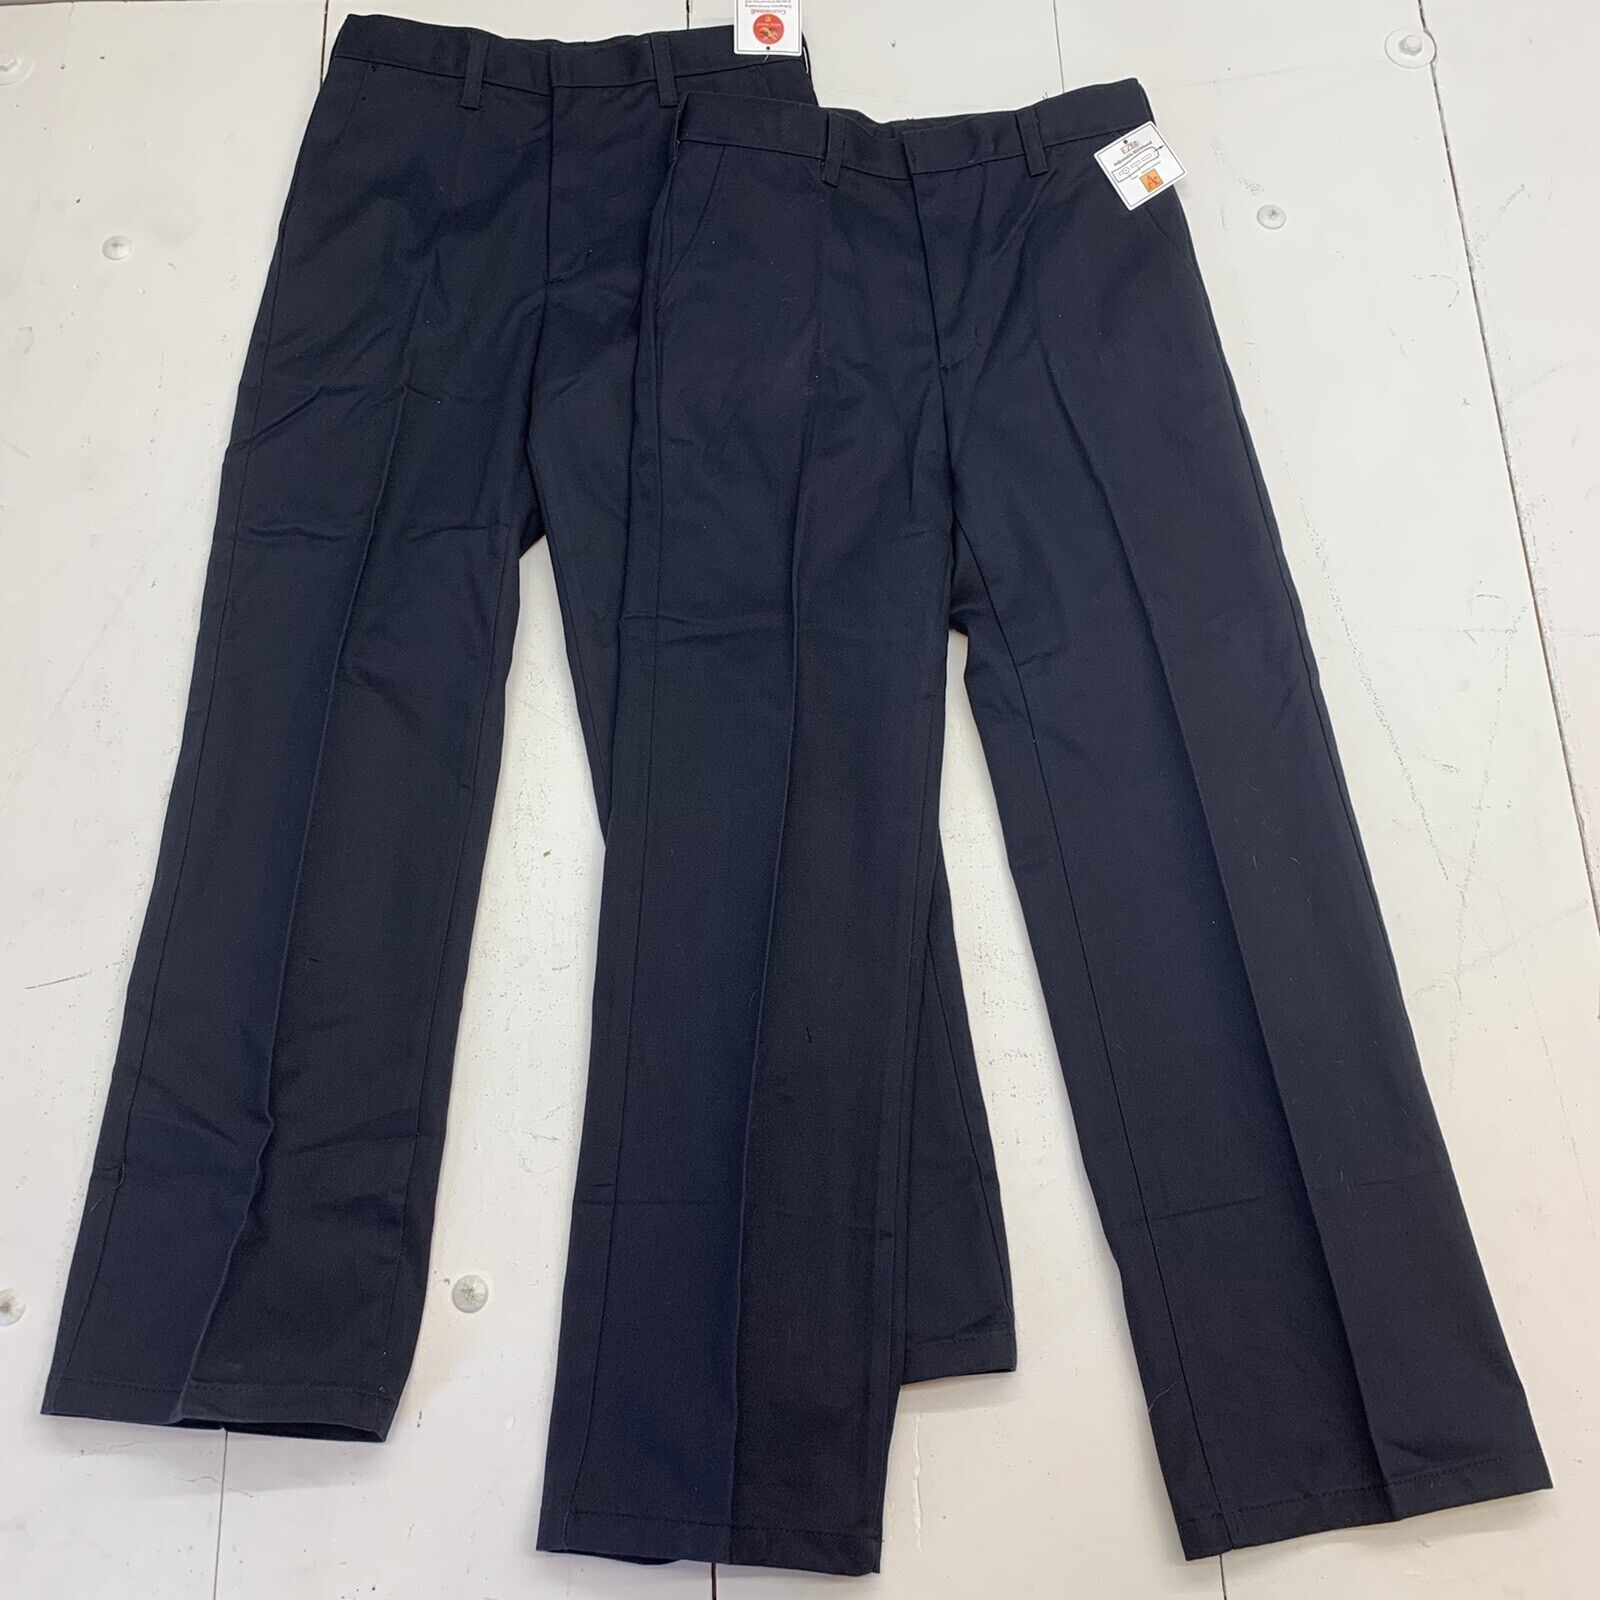 A+ Boys 2 pairs Navy Blue Relax Pant Size 16 28/29